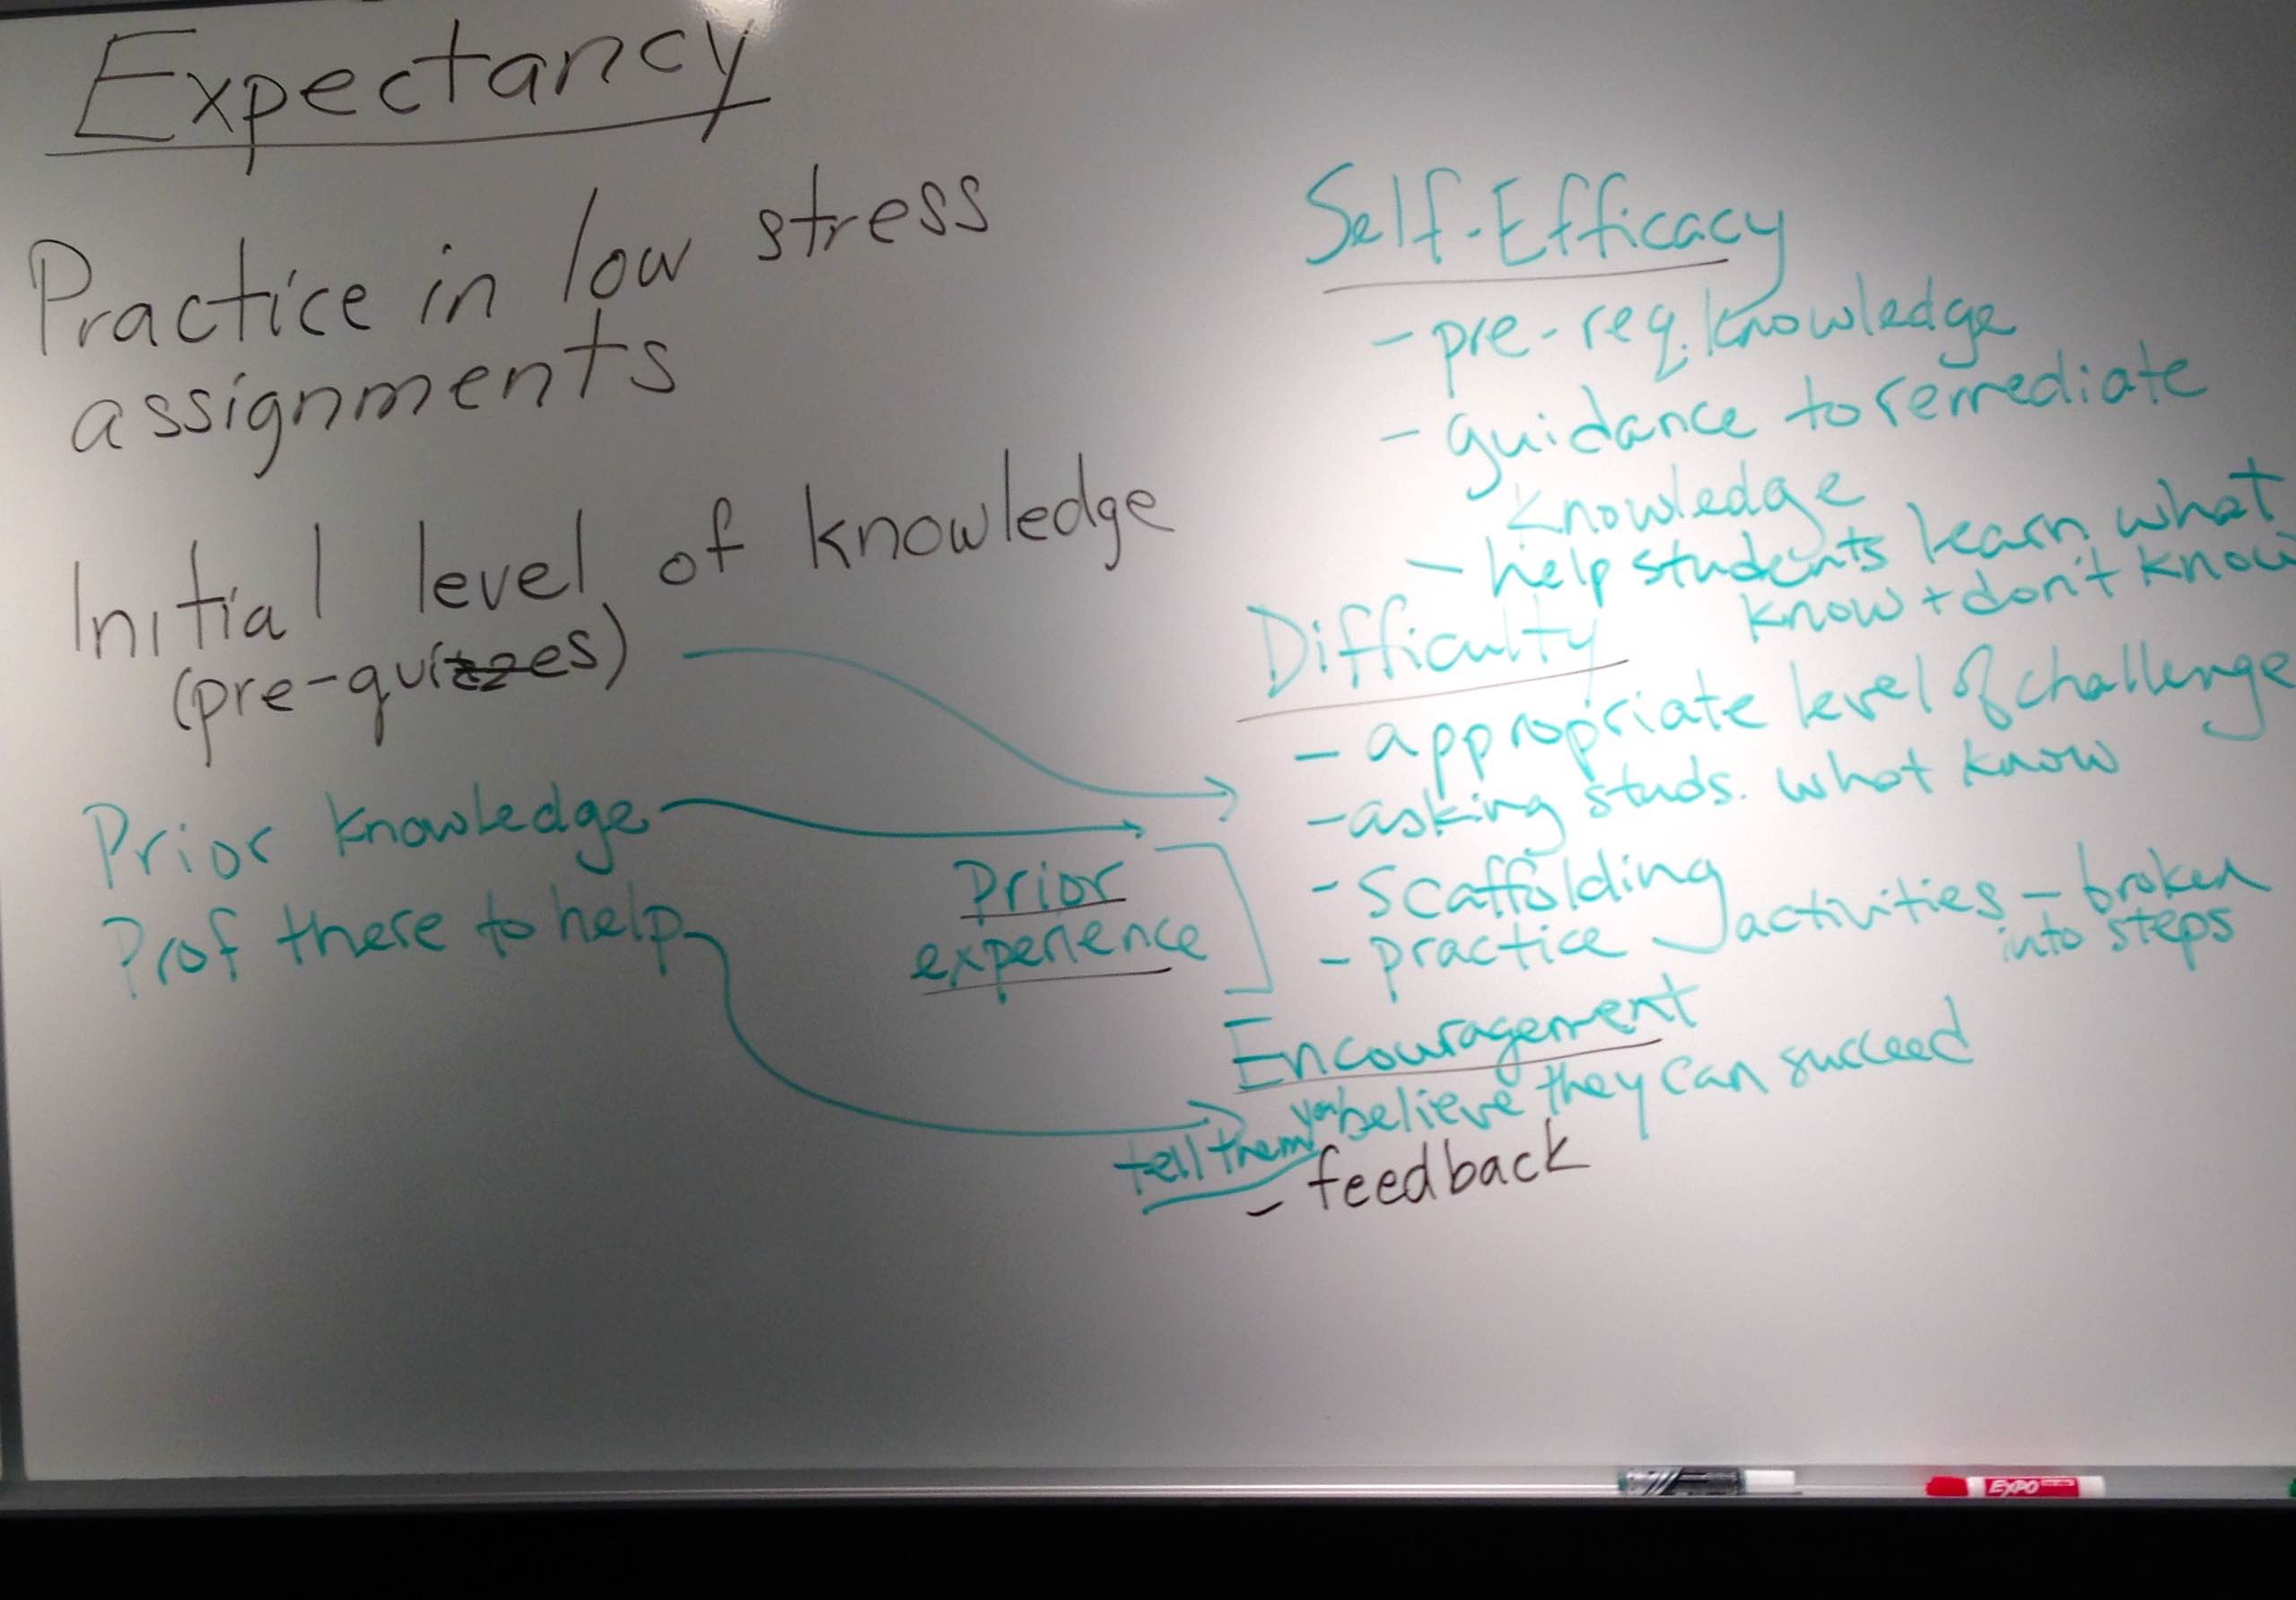 Connections identified on whiteboard for expectancy. Initial level of knowledge (pre-quizzes) are connected to difficulty (appropriate level of challenge, asking students what they know, scaffolding, and practice activities that are broken into steps). Prior knowledge is connected to difficulty as well. Lastly, having a professor there to help is linked to encouragement (having students know that you believe they can succeed).